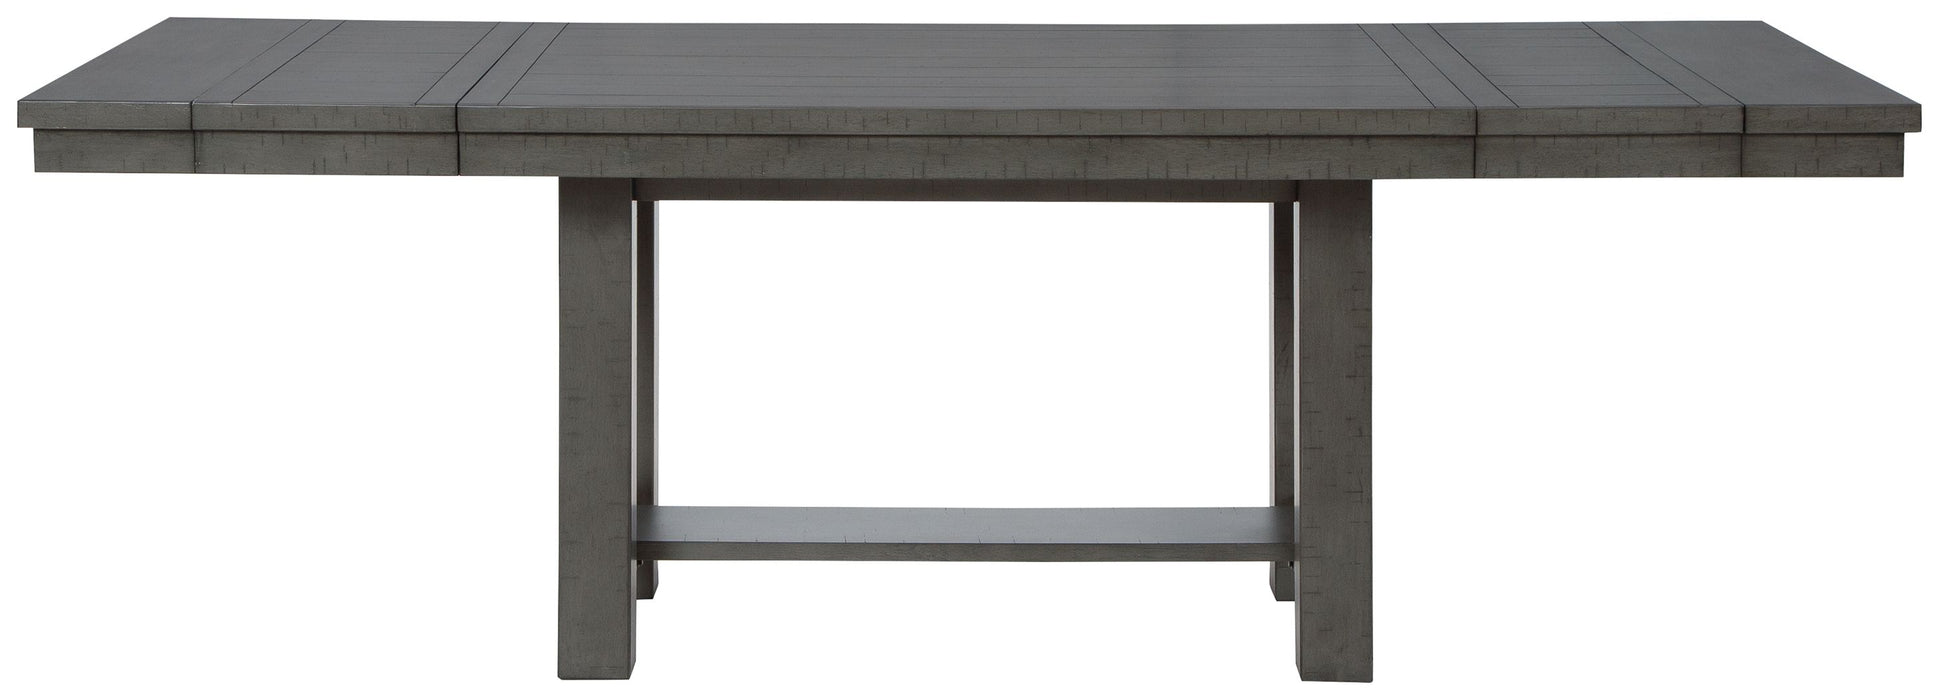 Myshanna - Gray - Rect Dining Room Ext Table